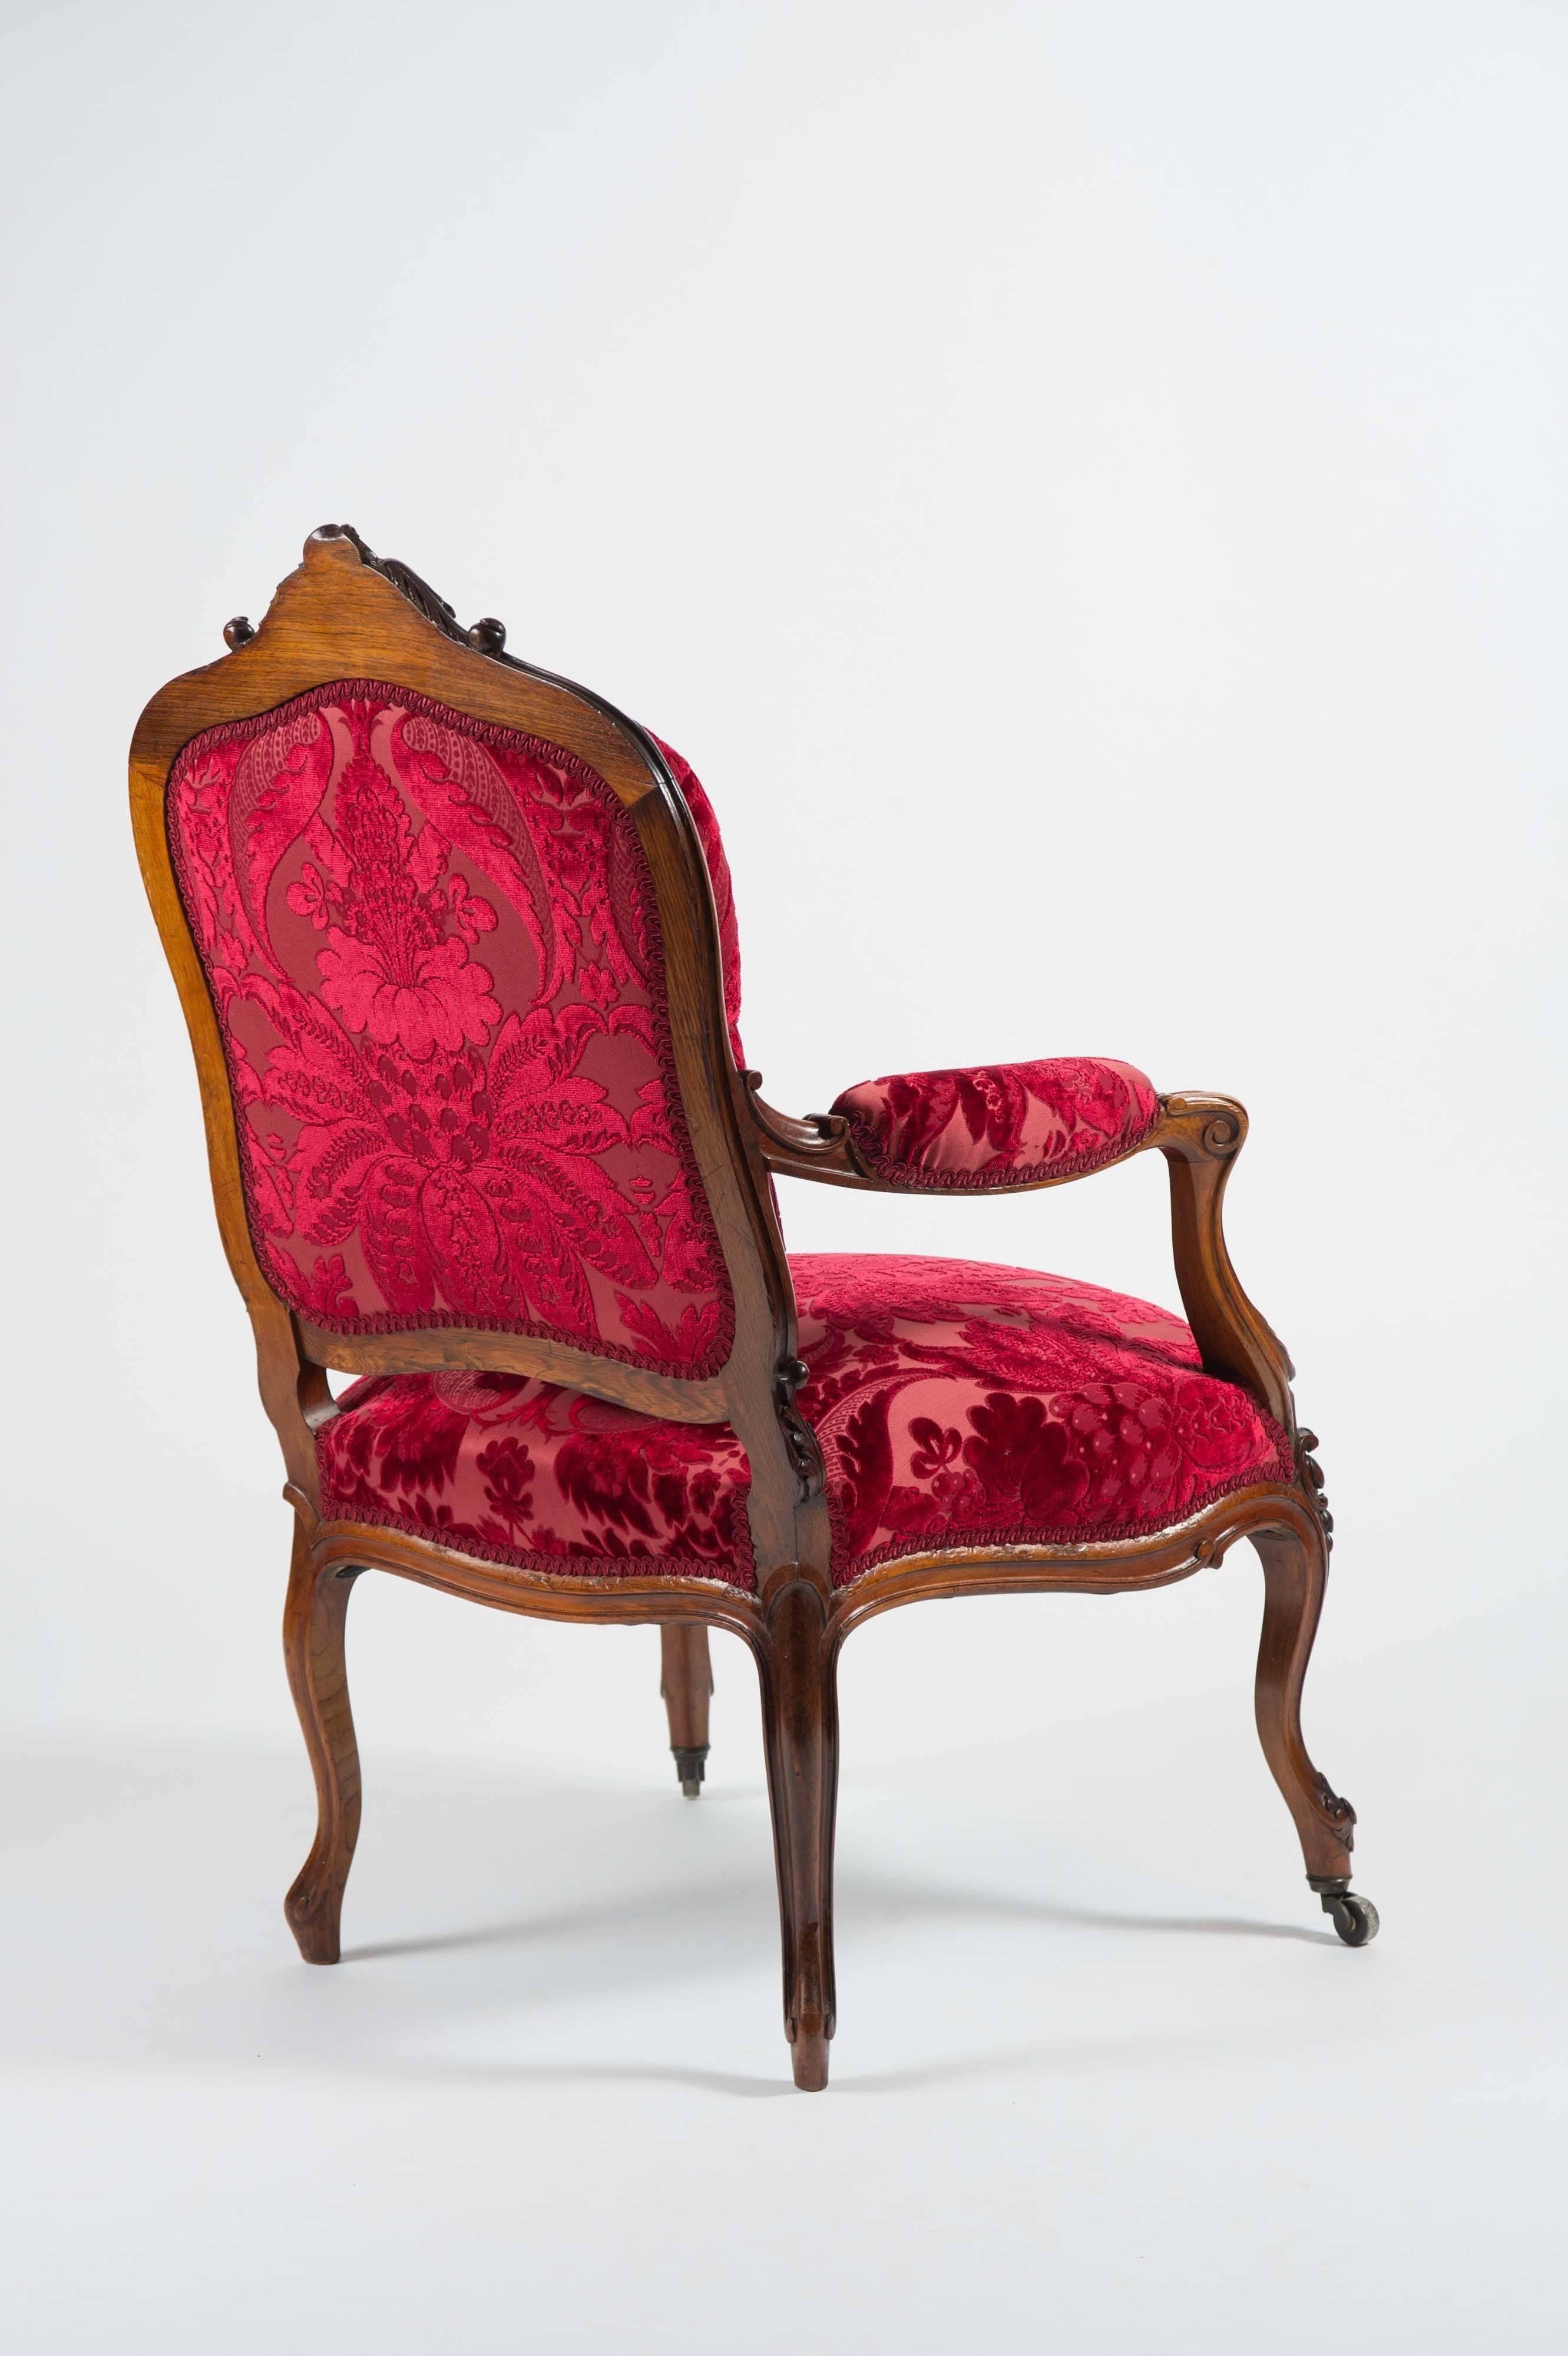 English Mid-19th Century Carved Rosewood Open Armchair in the French Style